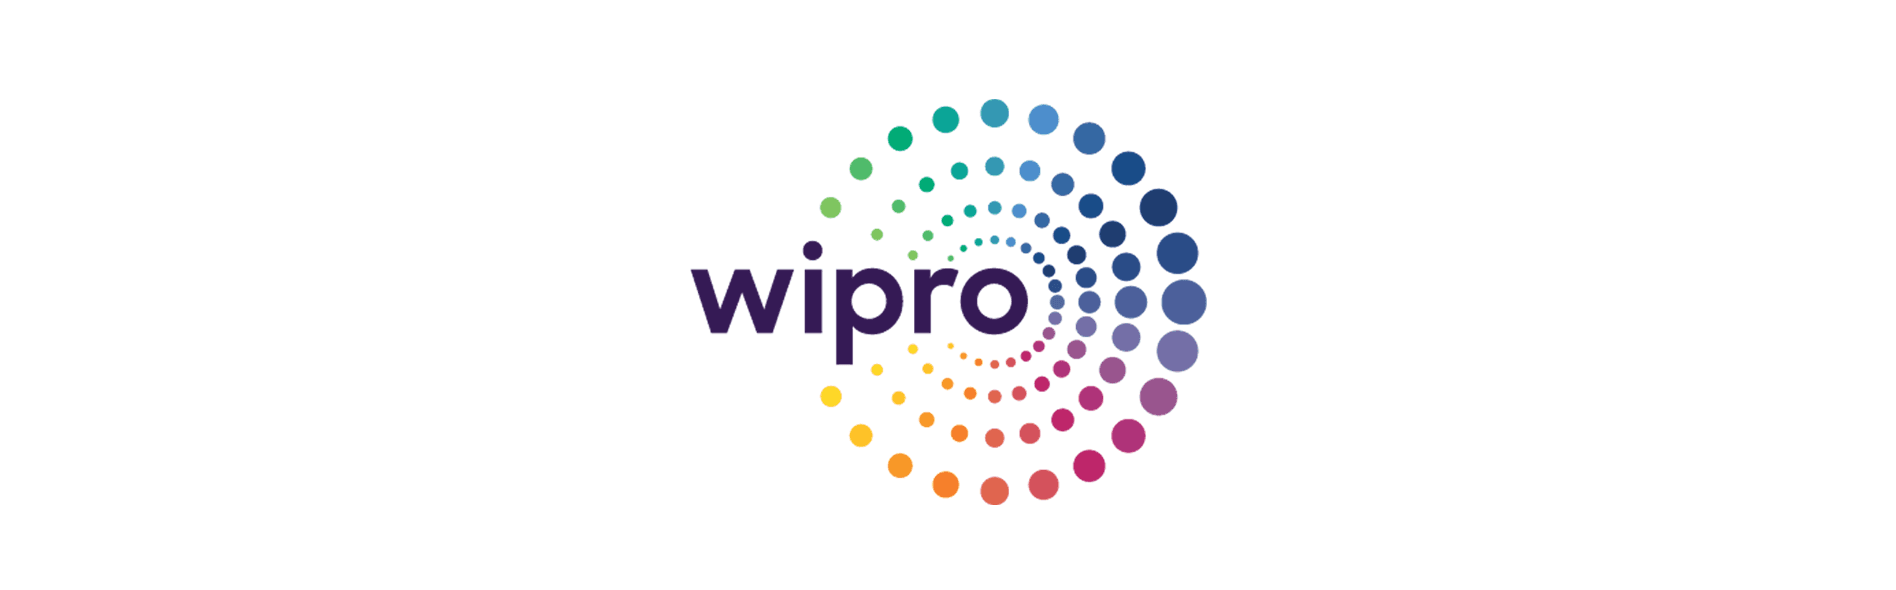 Image for AI Cognitive Computing Solutions & Services - Wipro